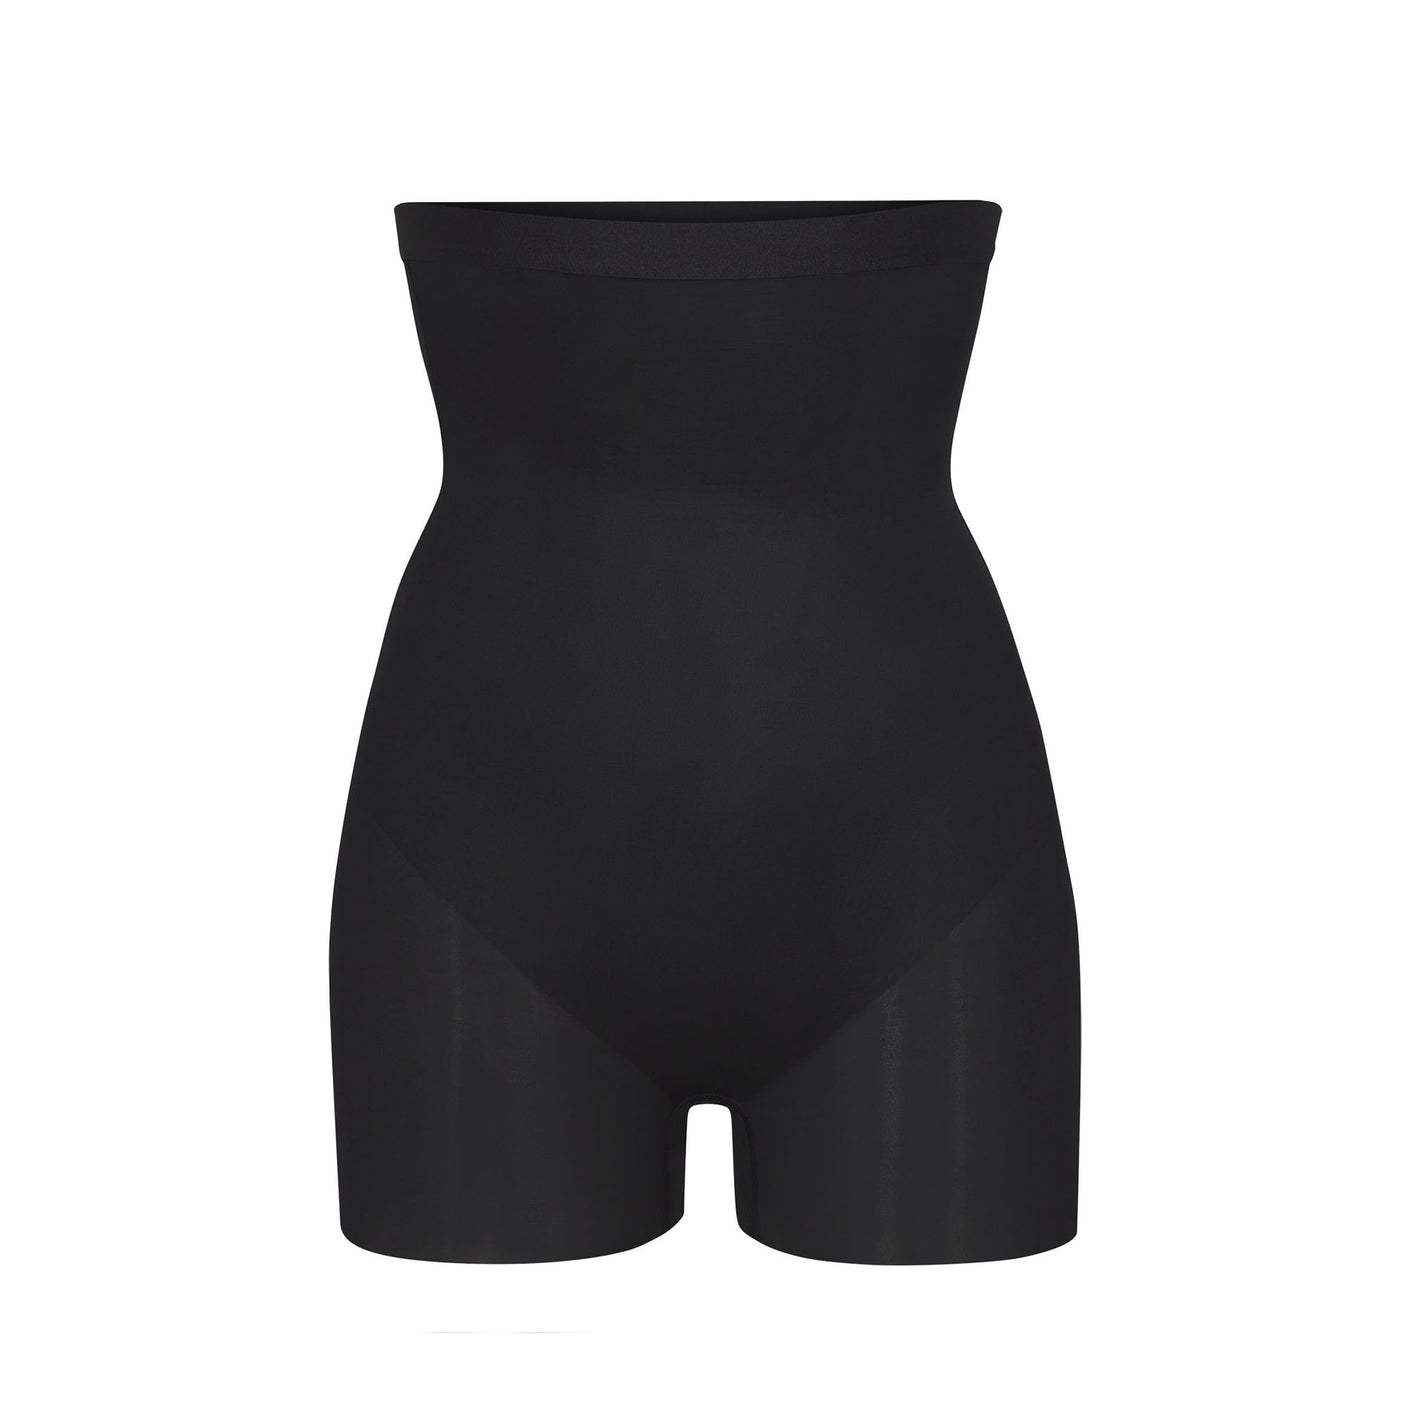 Barely There High-Waisted Shortie - Onyx